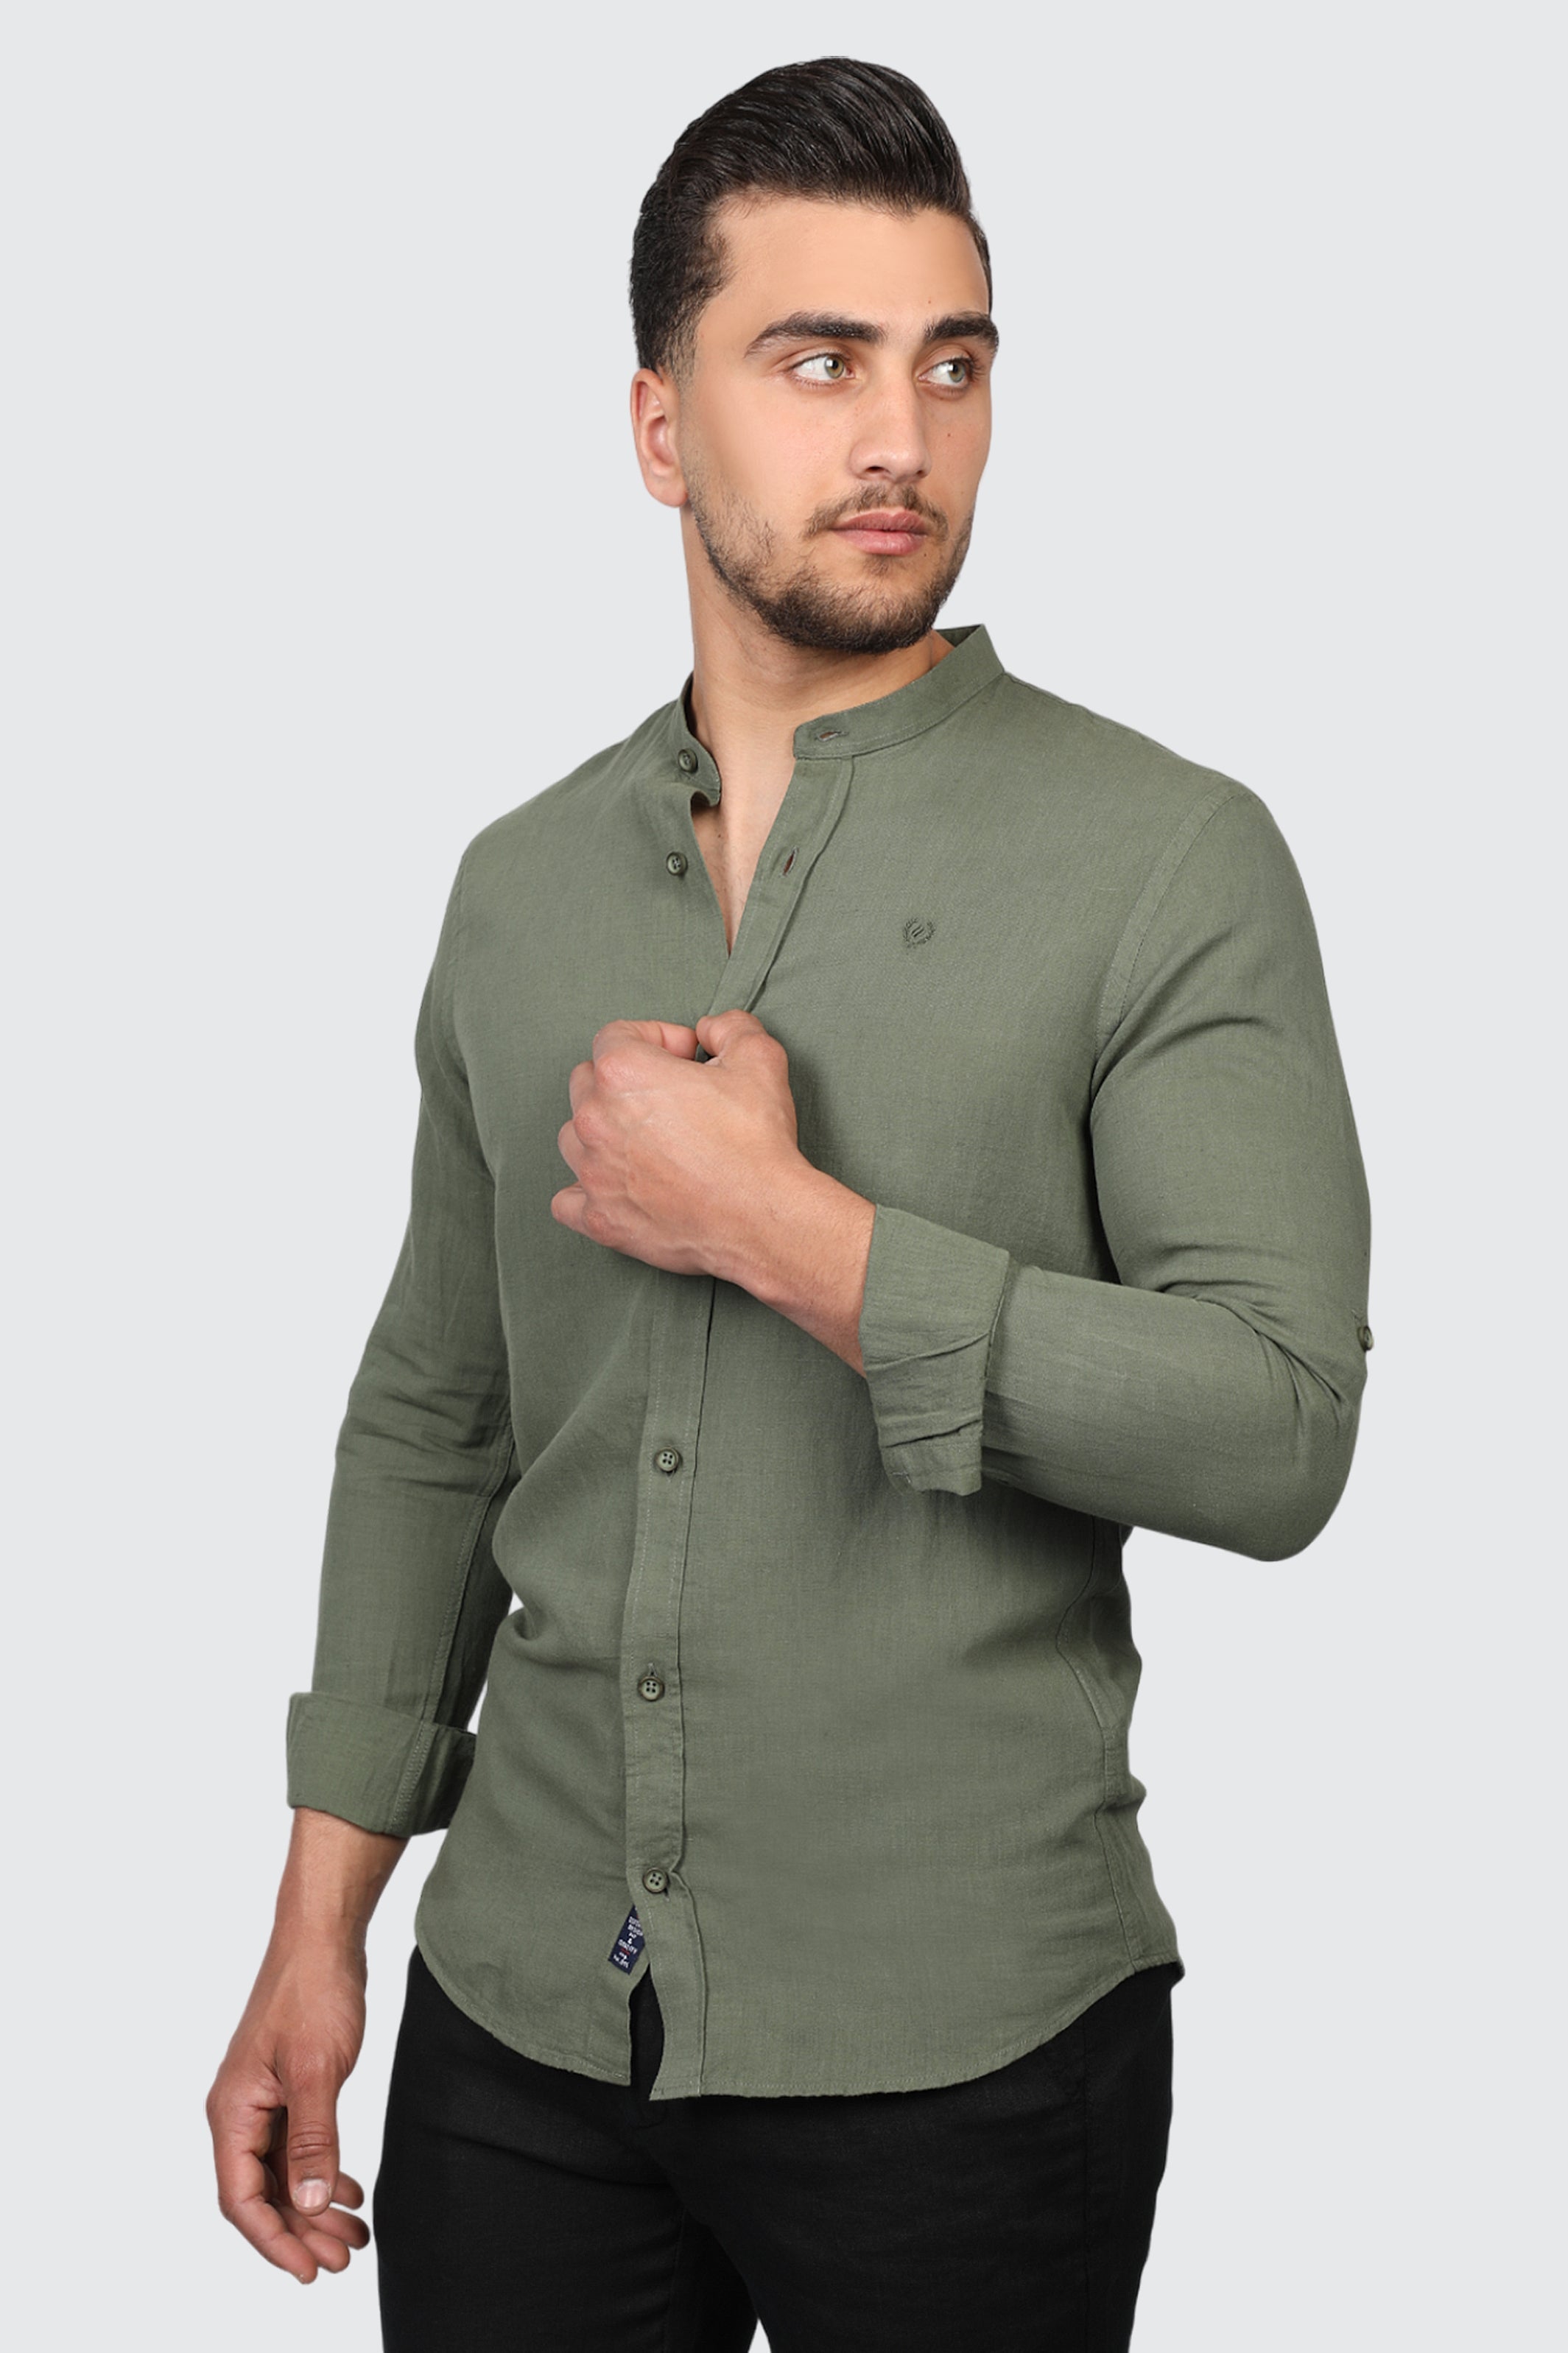 Long Sleeves Khaki Shirt Buttoned With Wing Collar